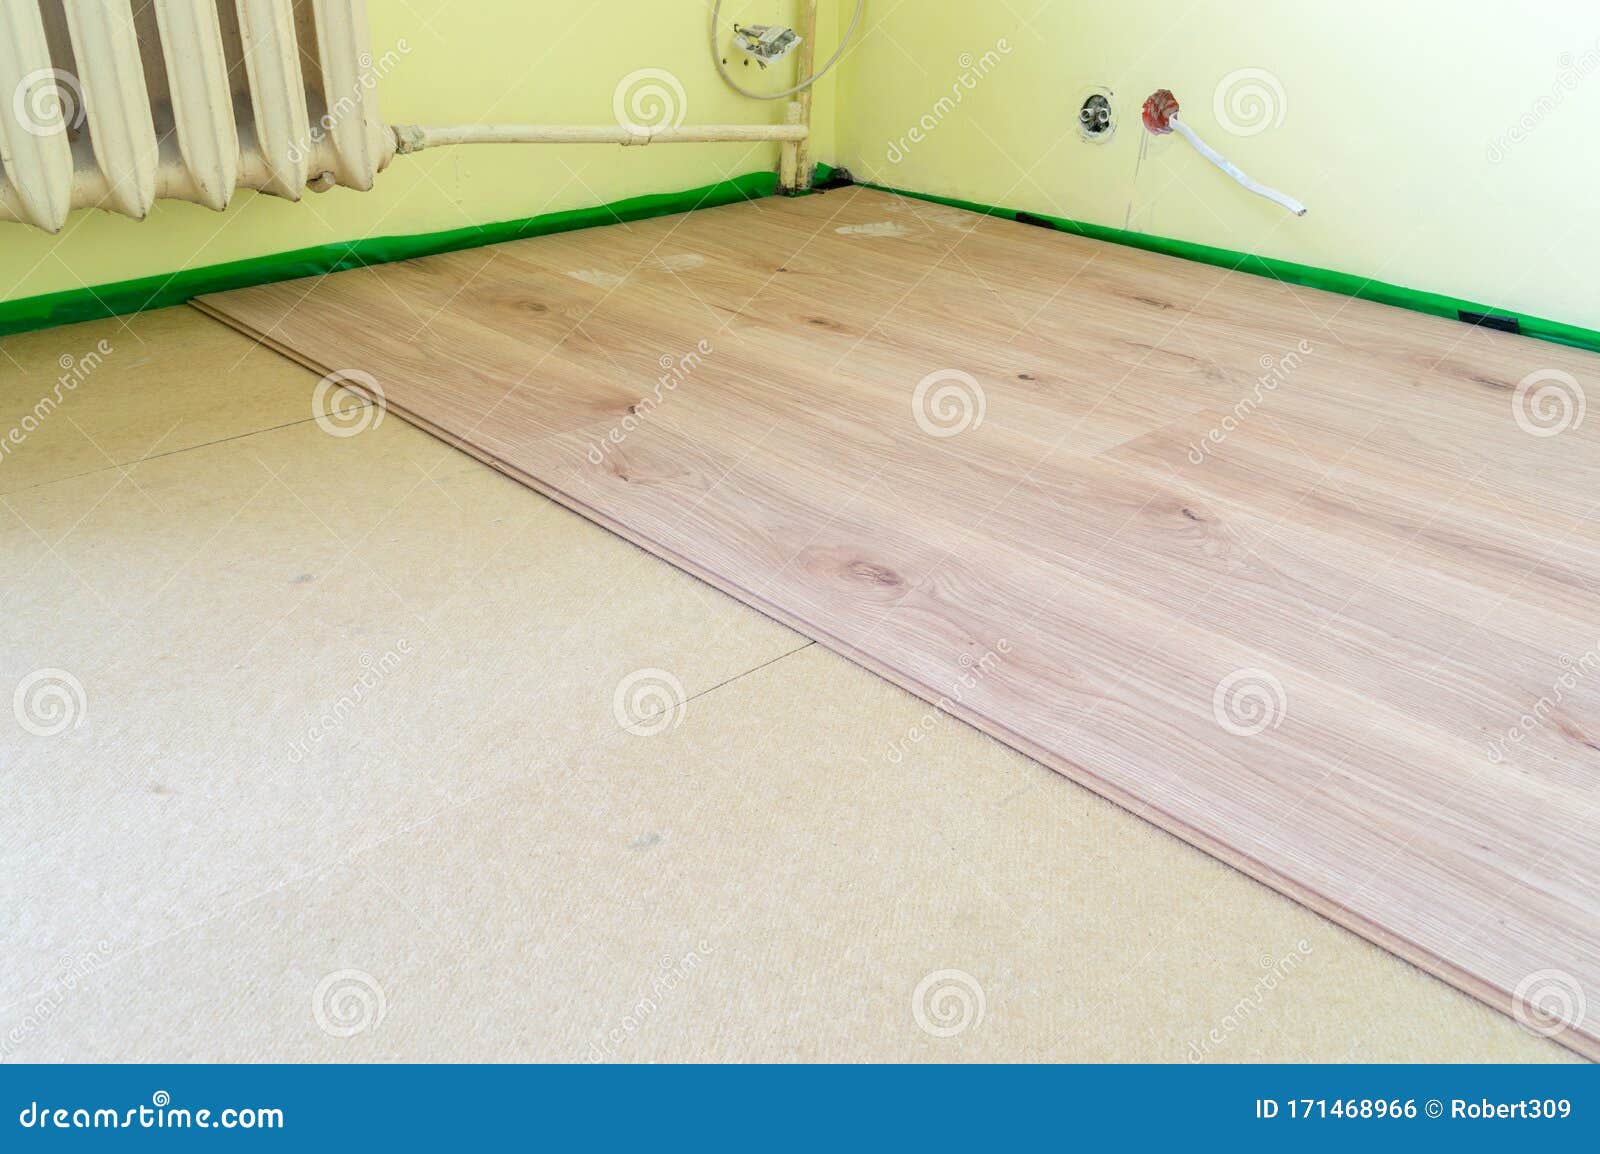 Laying Floor Panels On Chipboard Sleepers In The Room Stock Photo